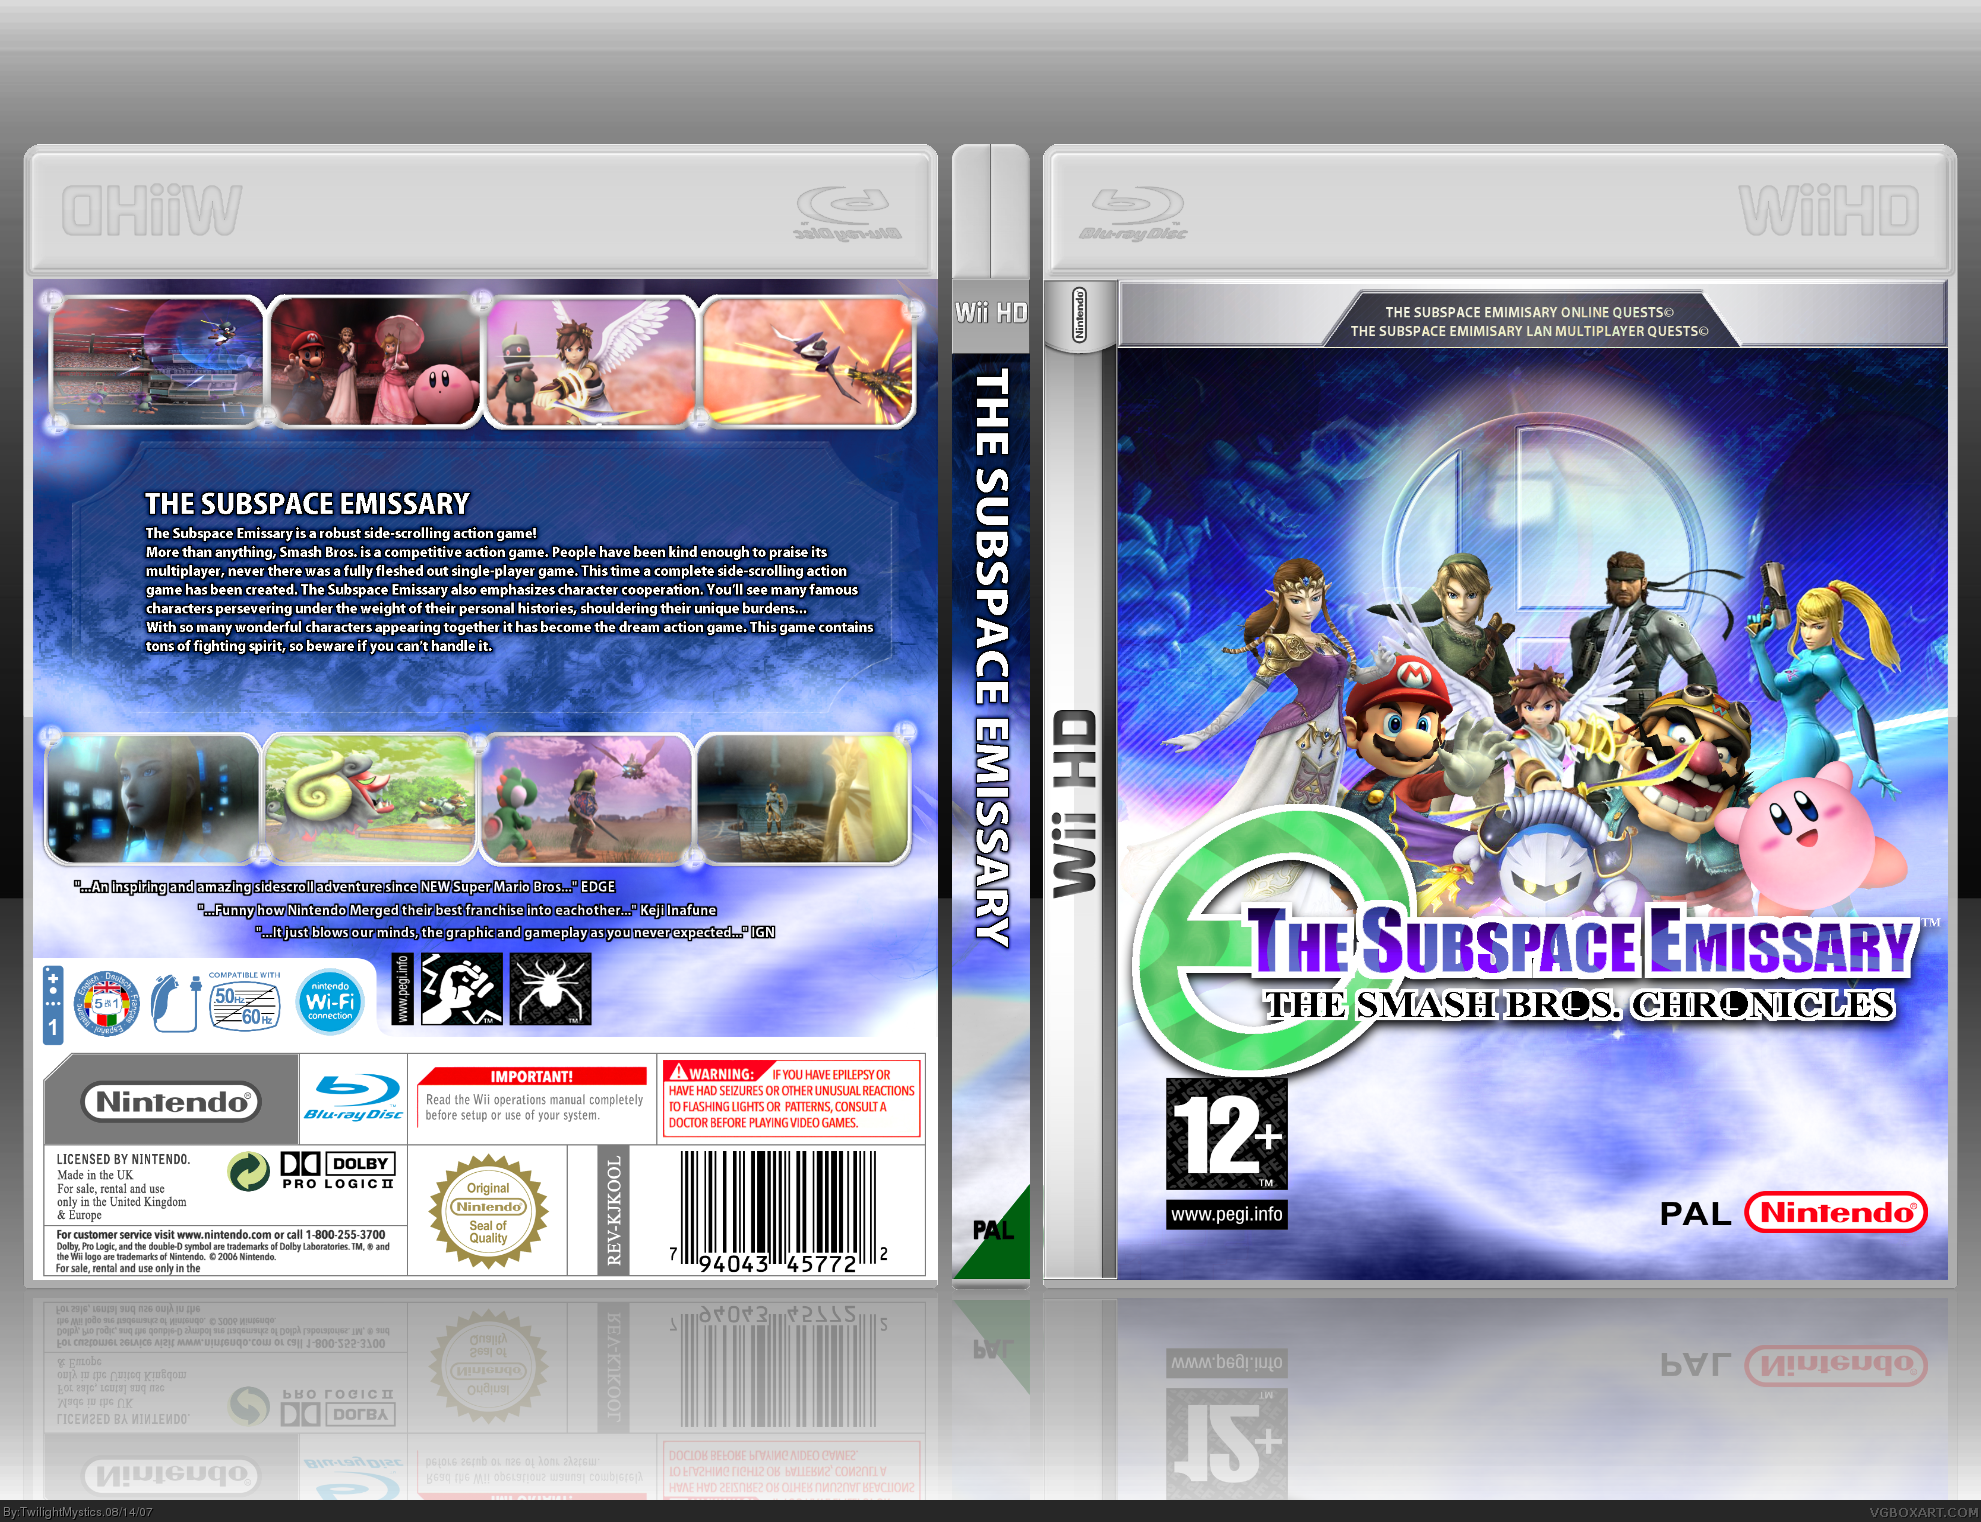 The Subspace Emissary (WiiHD) box cover